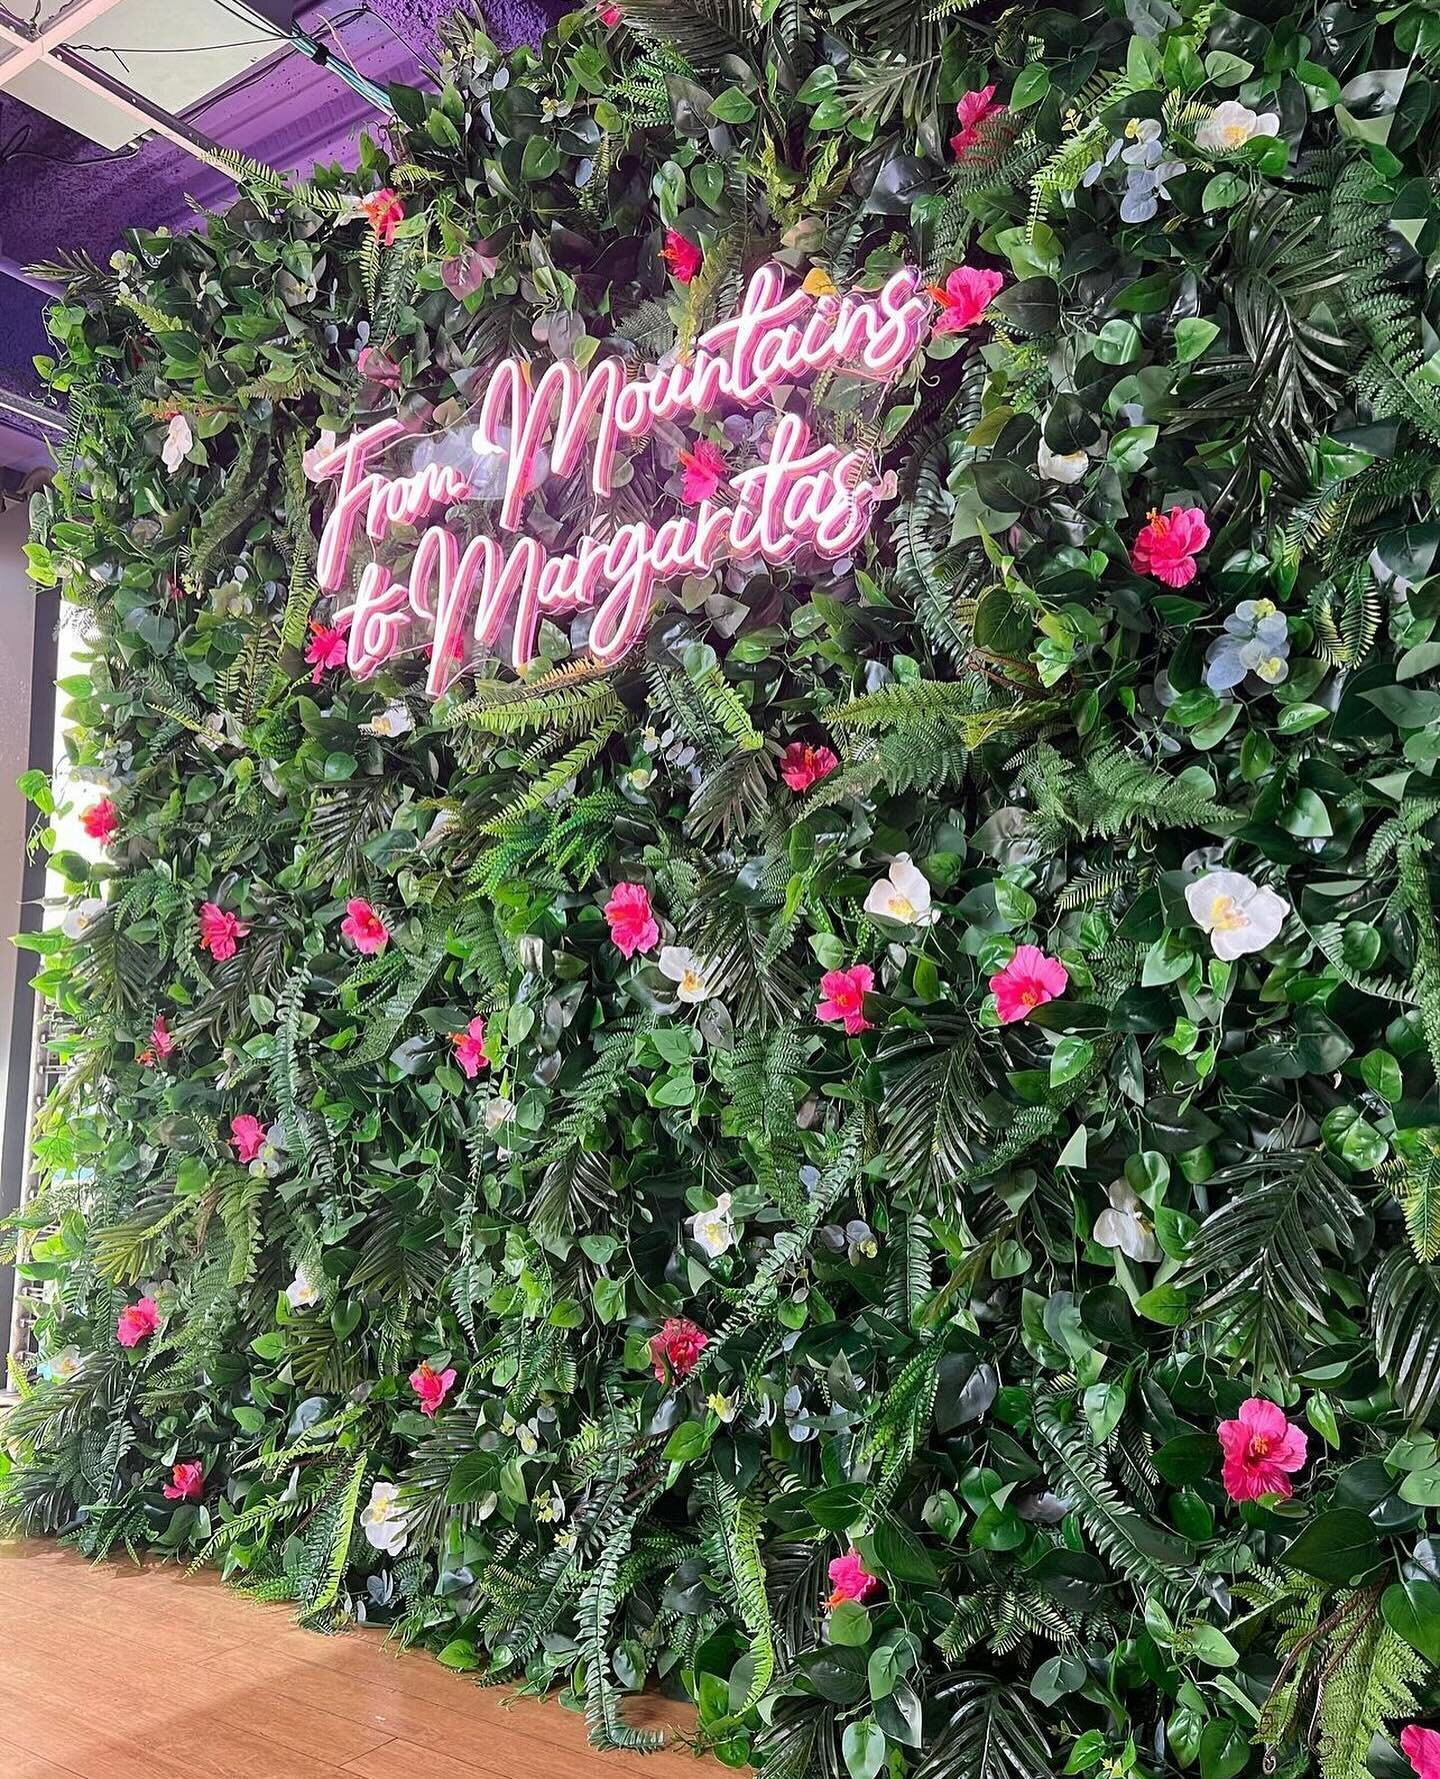 A fun and fabulous flower wall! This tropical flower wall has pink hibiscus flowers, and white orchids with an assortment of lush green foliage. Dress it up with a neon or wooden sign! Our Hibiscus Paradise tropical flower wall is perfect for birthda